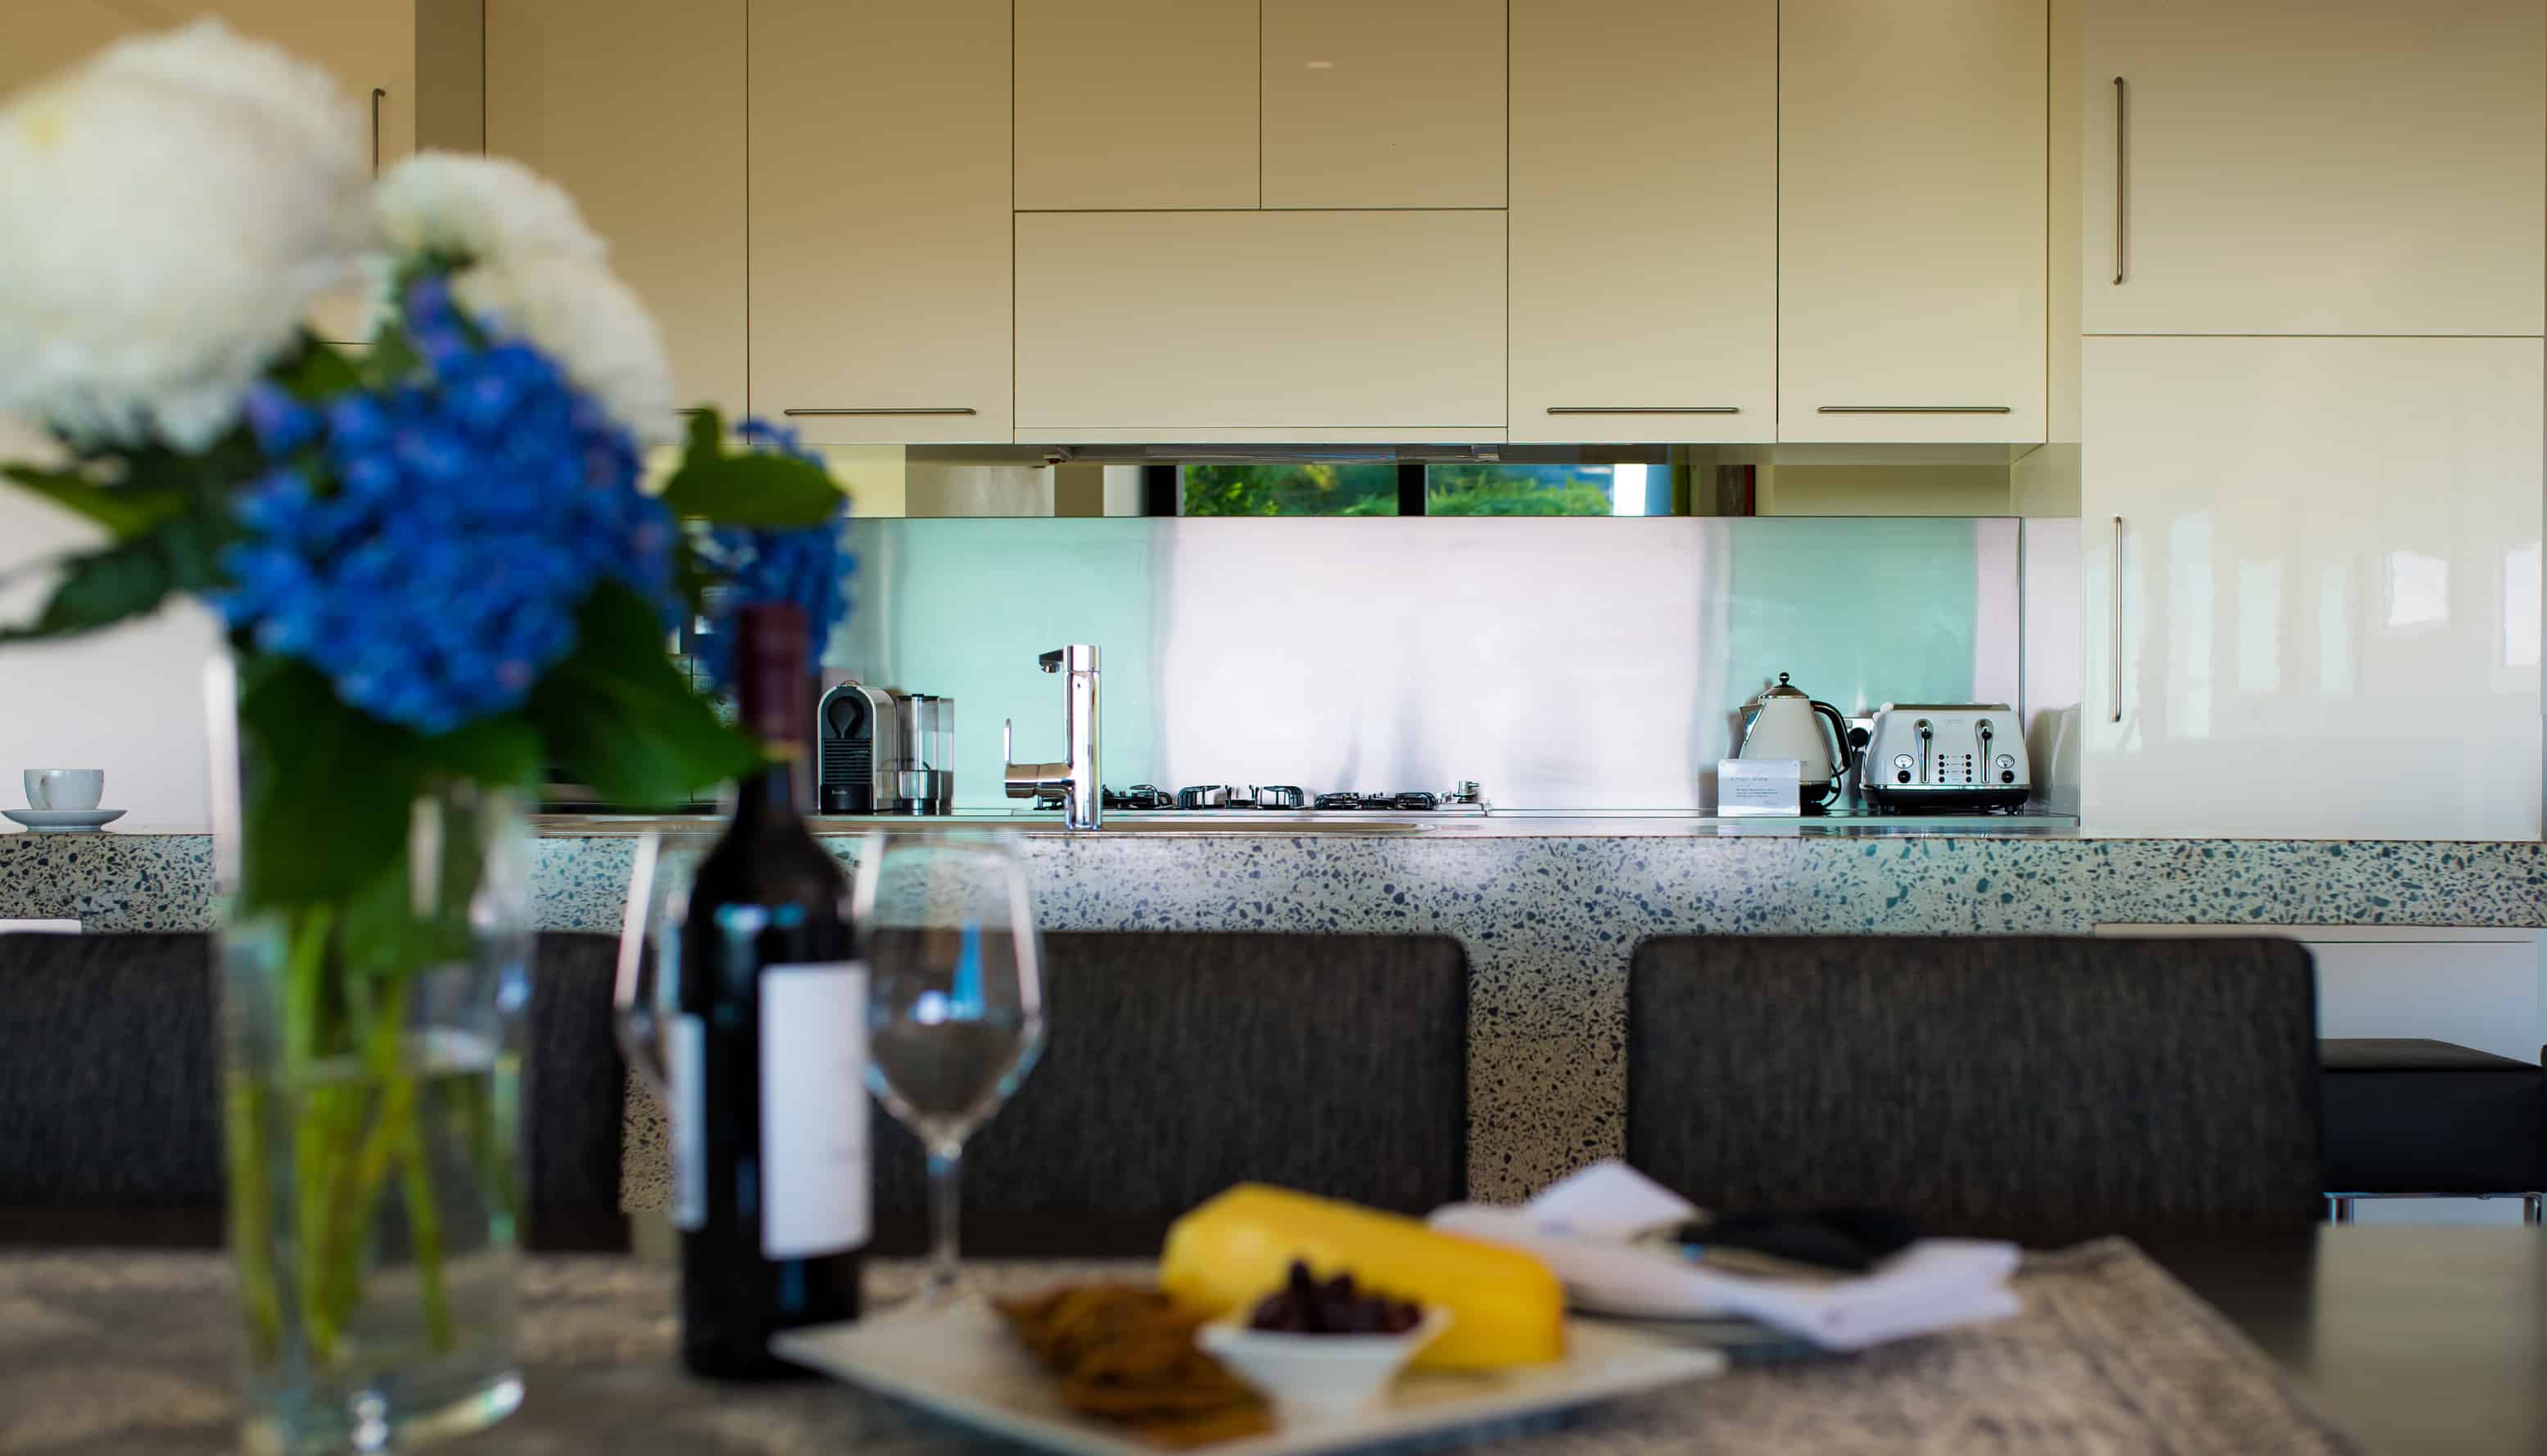 Modern kitchen with clean lines and neutral tones, featuring a bouquet of blue hydrangeas in the foreground, and a bottle of wine with glasses ready to serve.